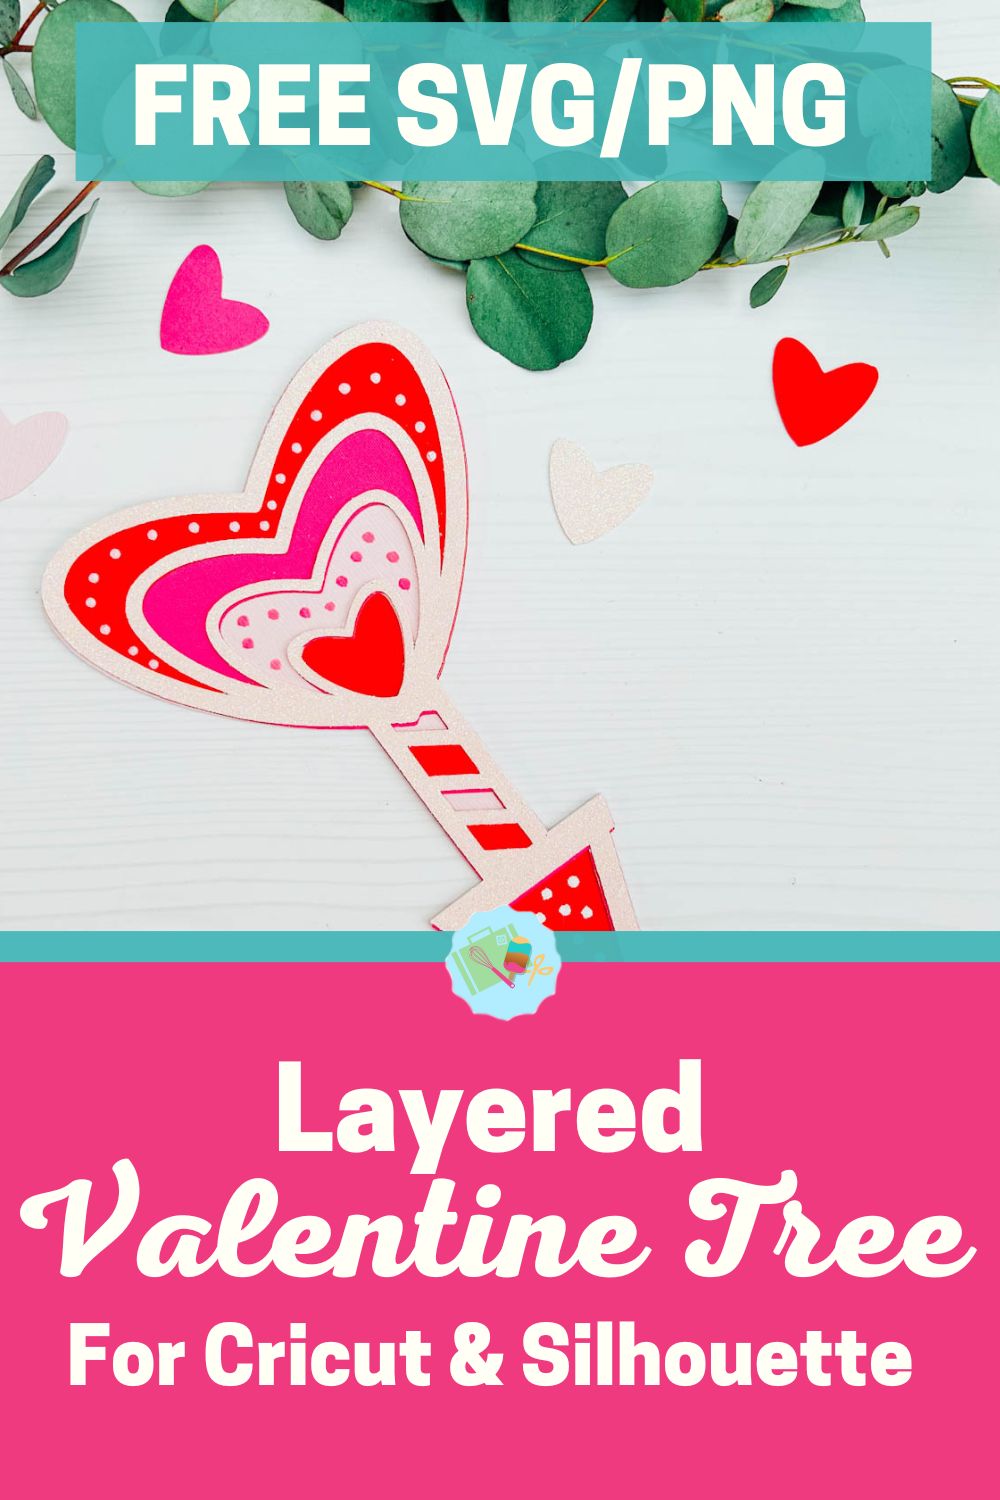 Free Layered Valentines tree SVG PNG for Cricut and Silhouette